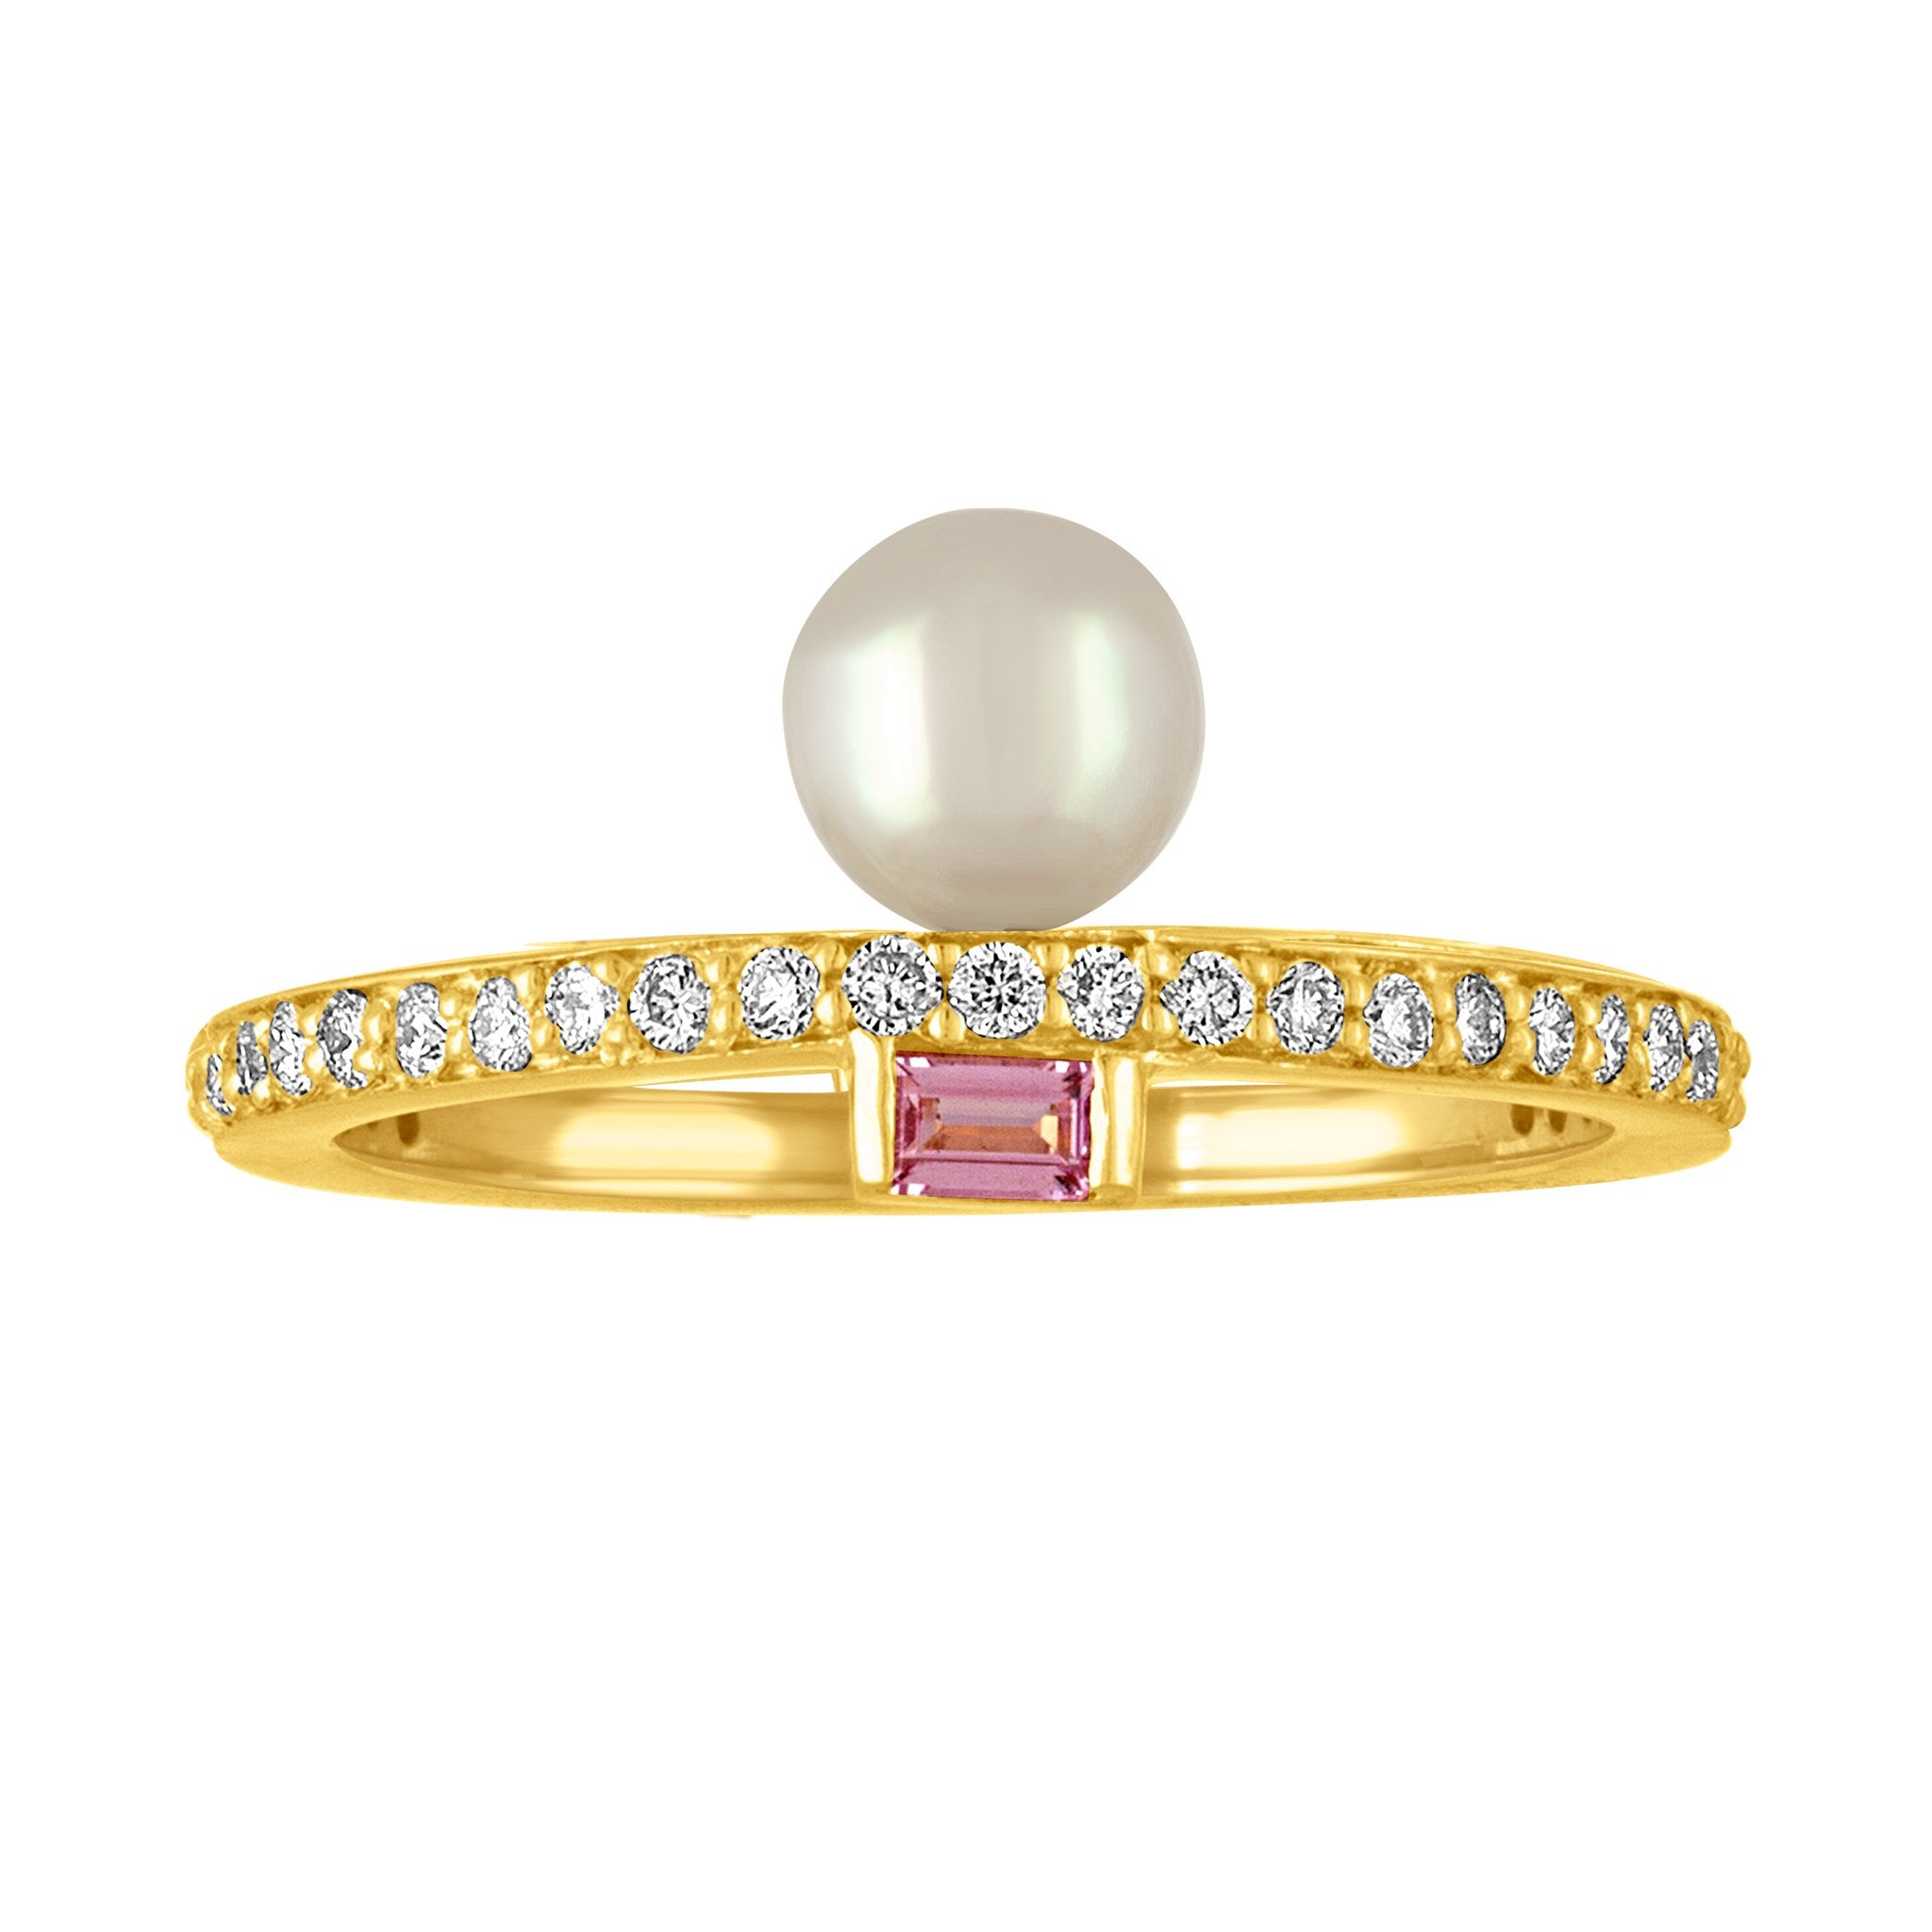 Mini Claire Ring: 18k Gold, Diamonds, Pink Sapphire Baguettes, White Akoya Pearl